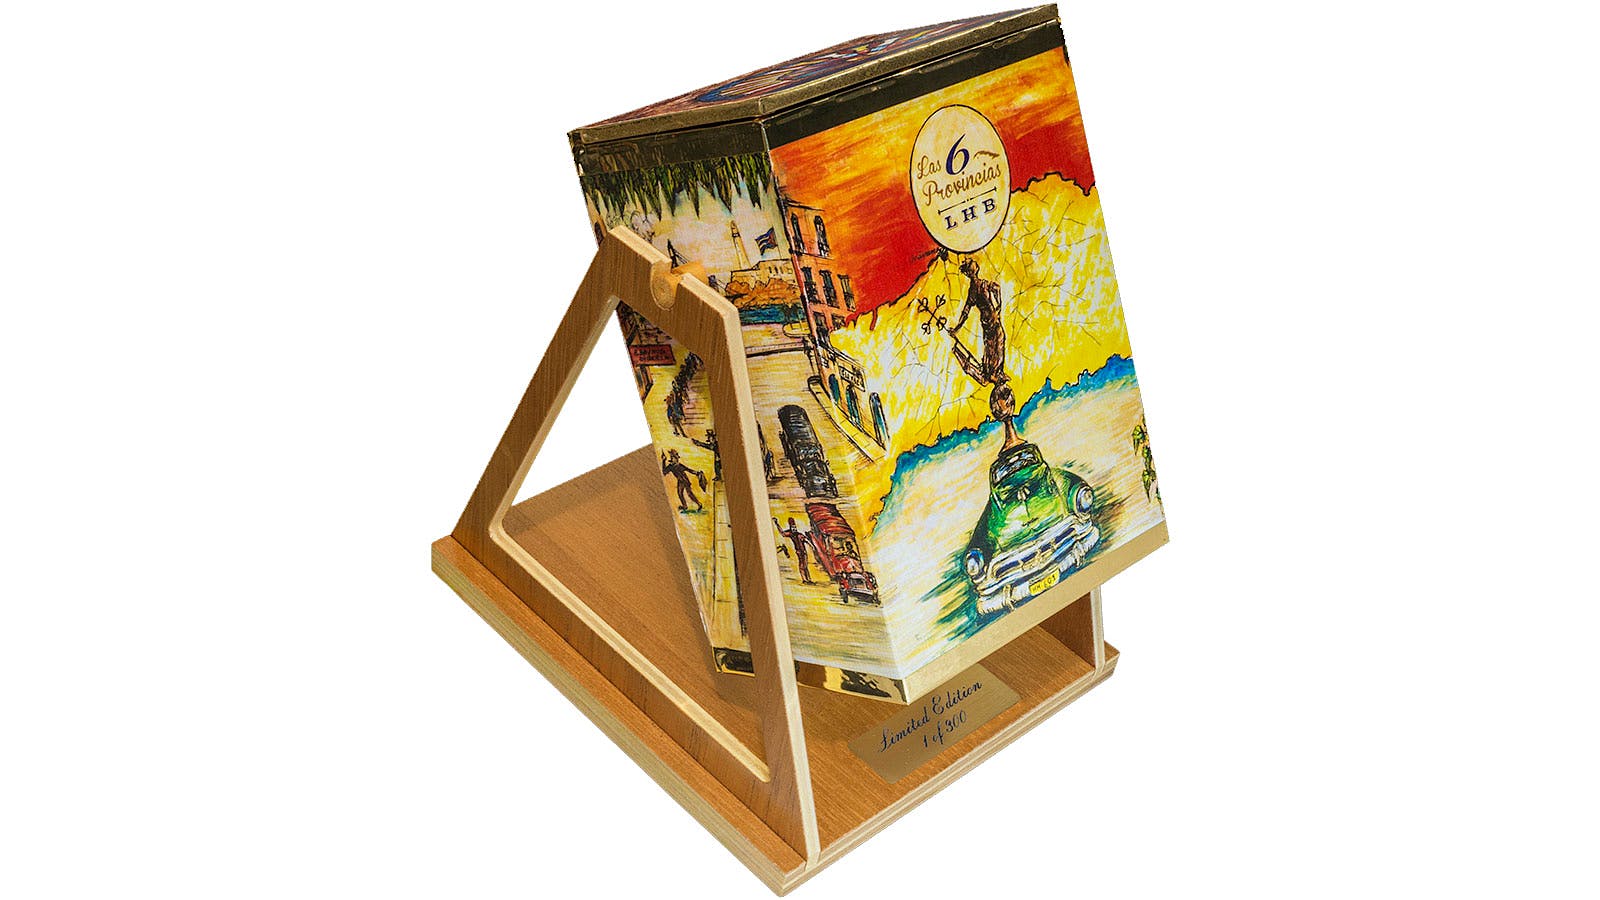 The Las 6 Provincias limited-edition “swing box” contains 20 cigars.